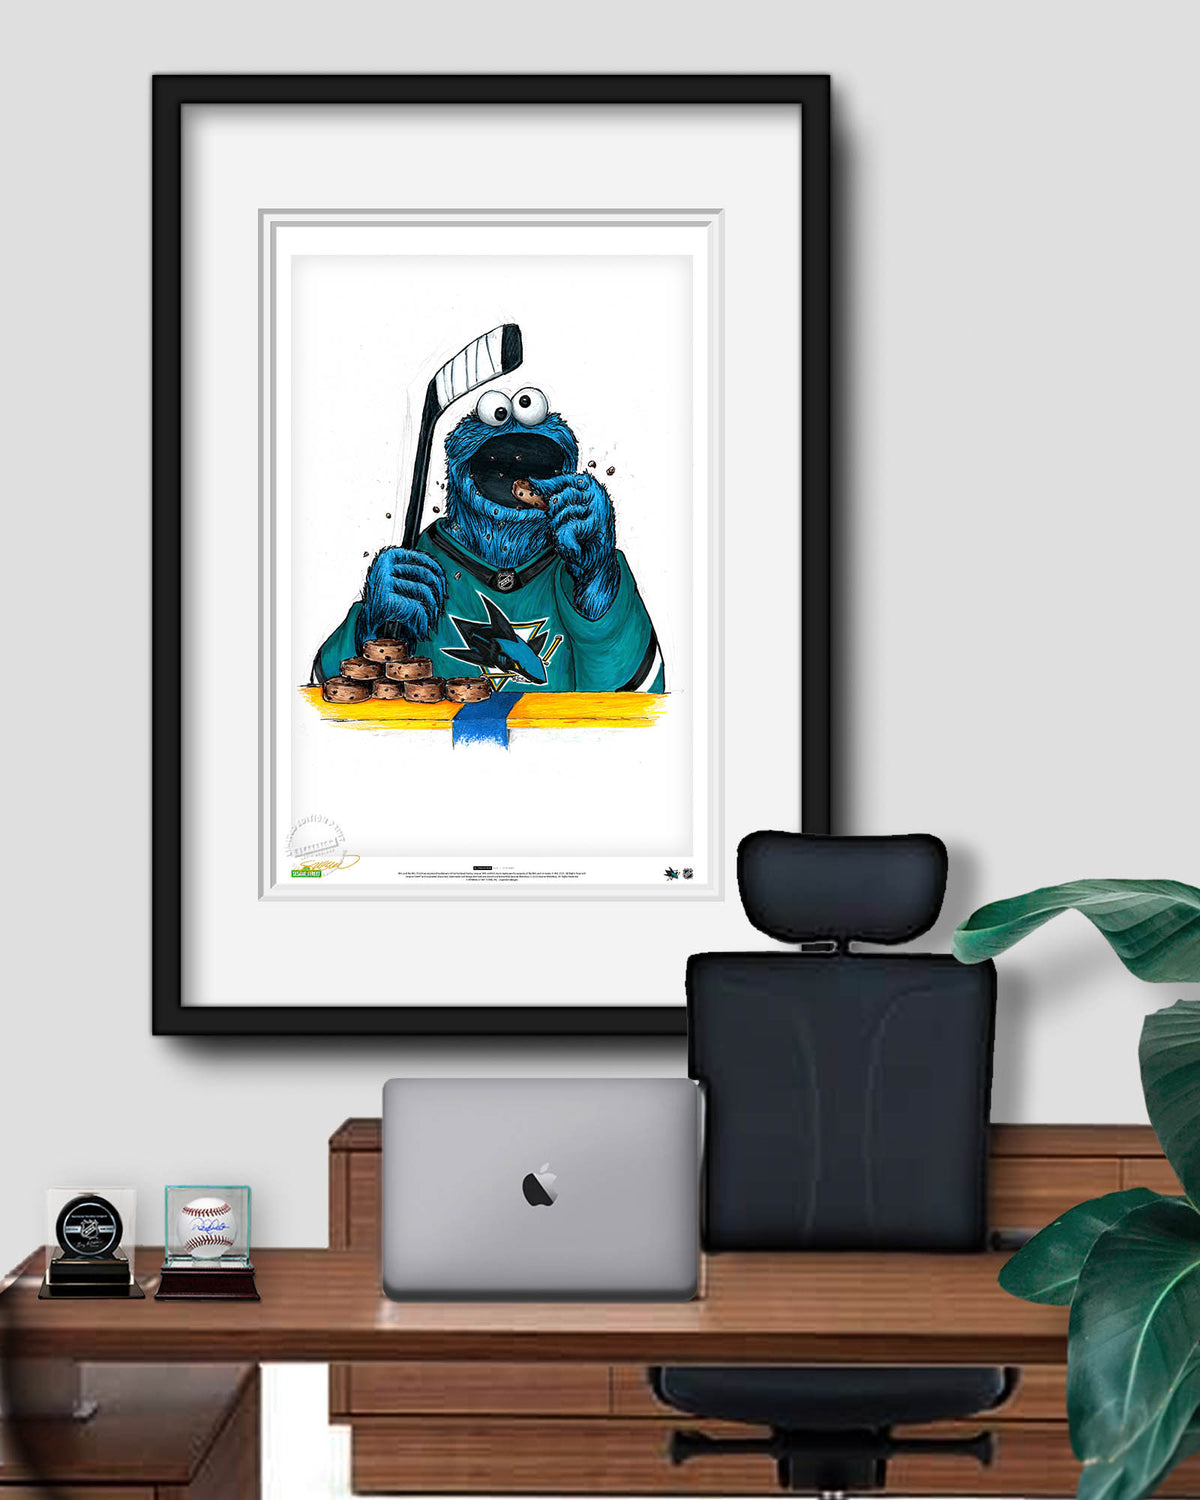 Cookie Monster x NHL Sharks Limited Edition Fine Art Print